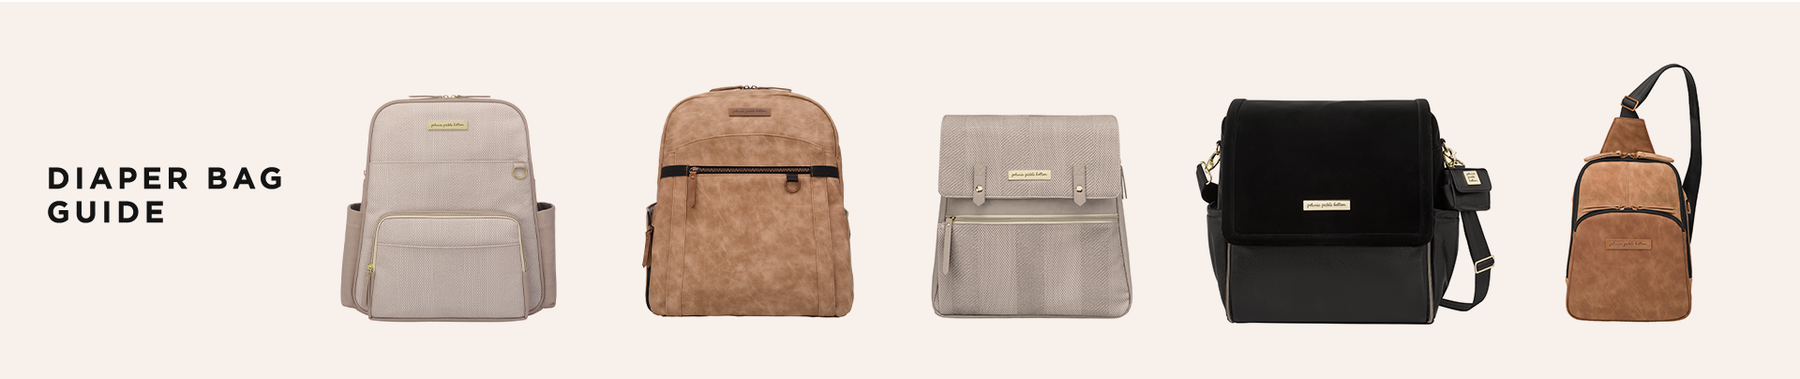 diaper bag guide. featuring the sync backpack in grey matte cable stitch, provisions backpack in brioche, meta backpack in sand cable stitch, boxy backpack in twilight black, and criss-cross sling in brioche